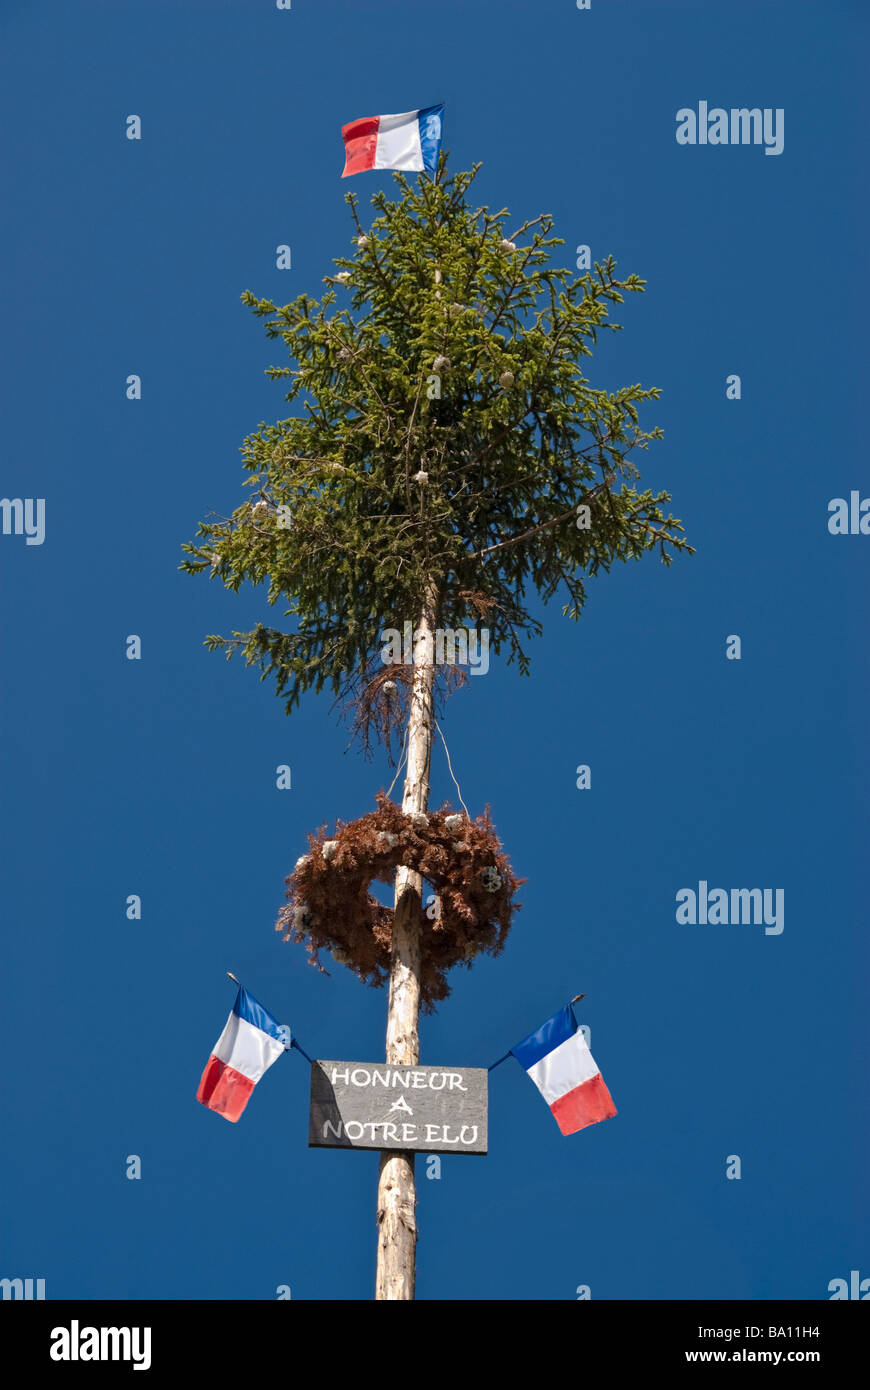 La Mai des elus The tree of May erected in honour of newly elected officials Auvergne France Stock Photo